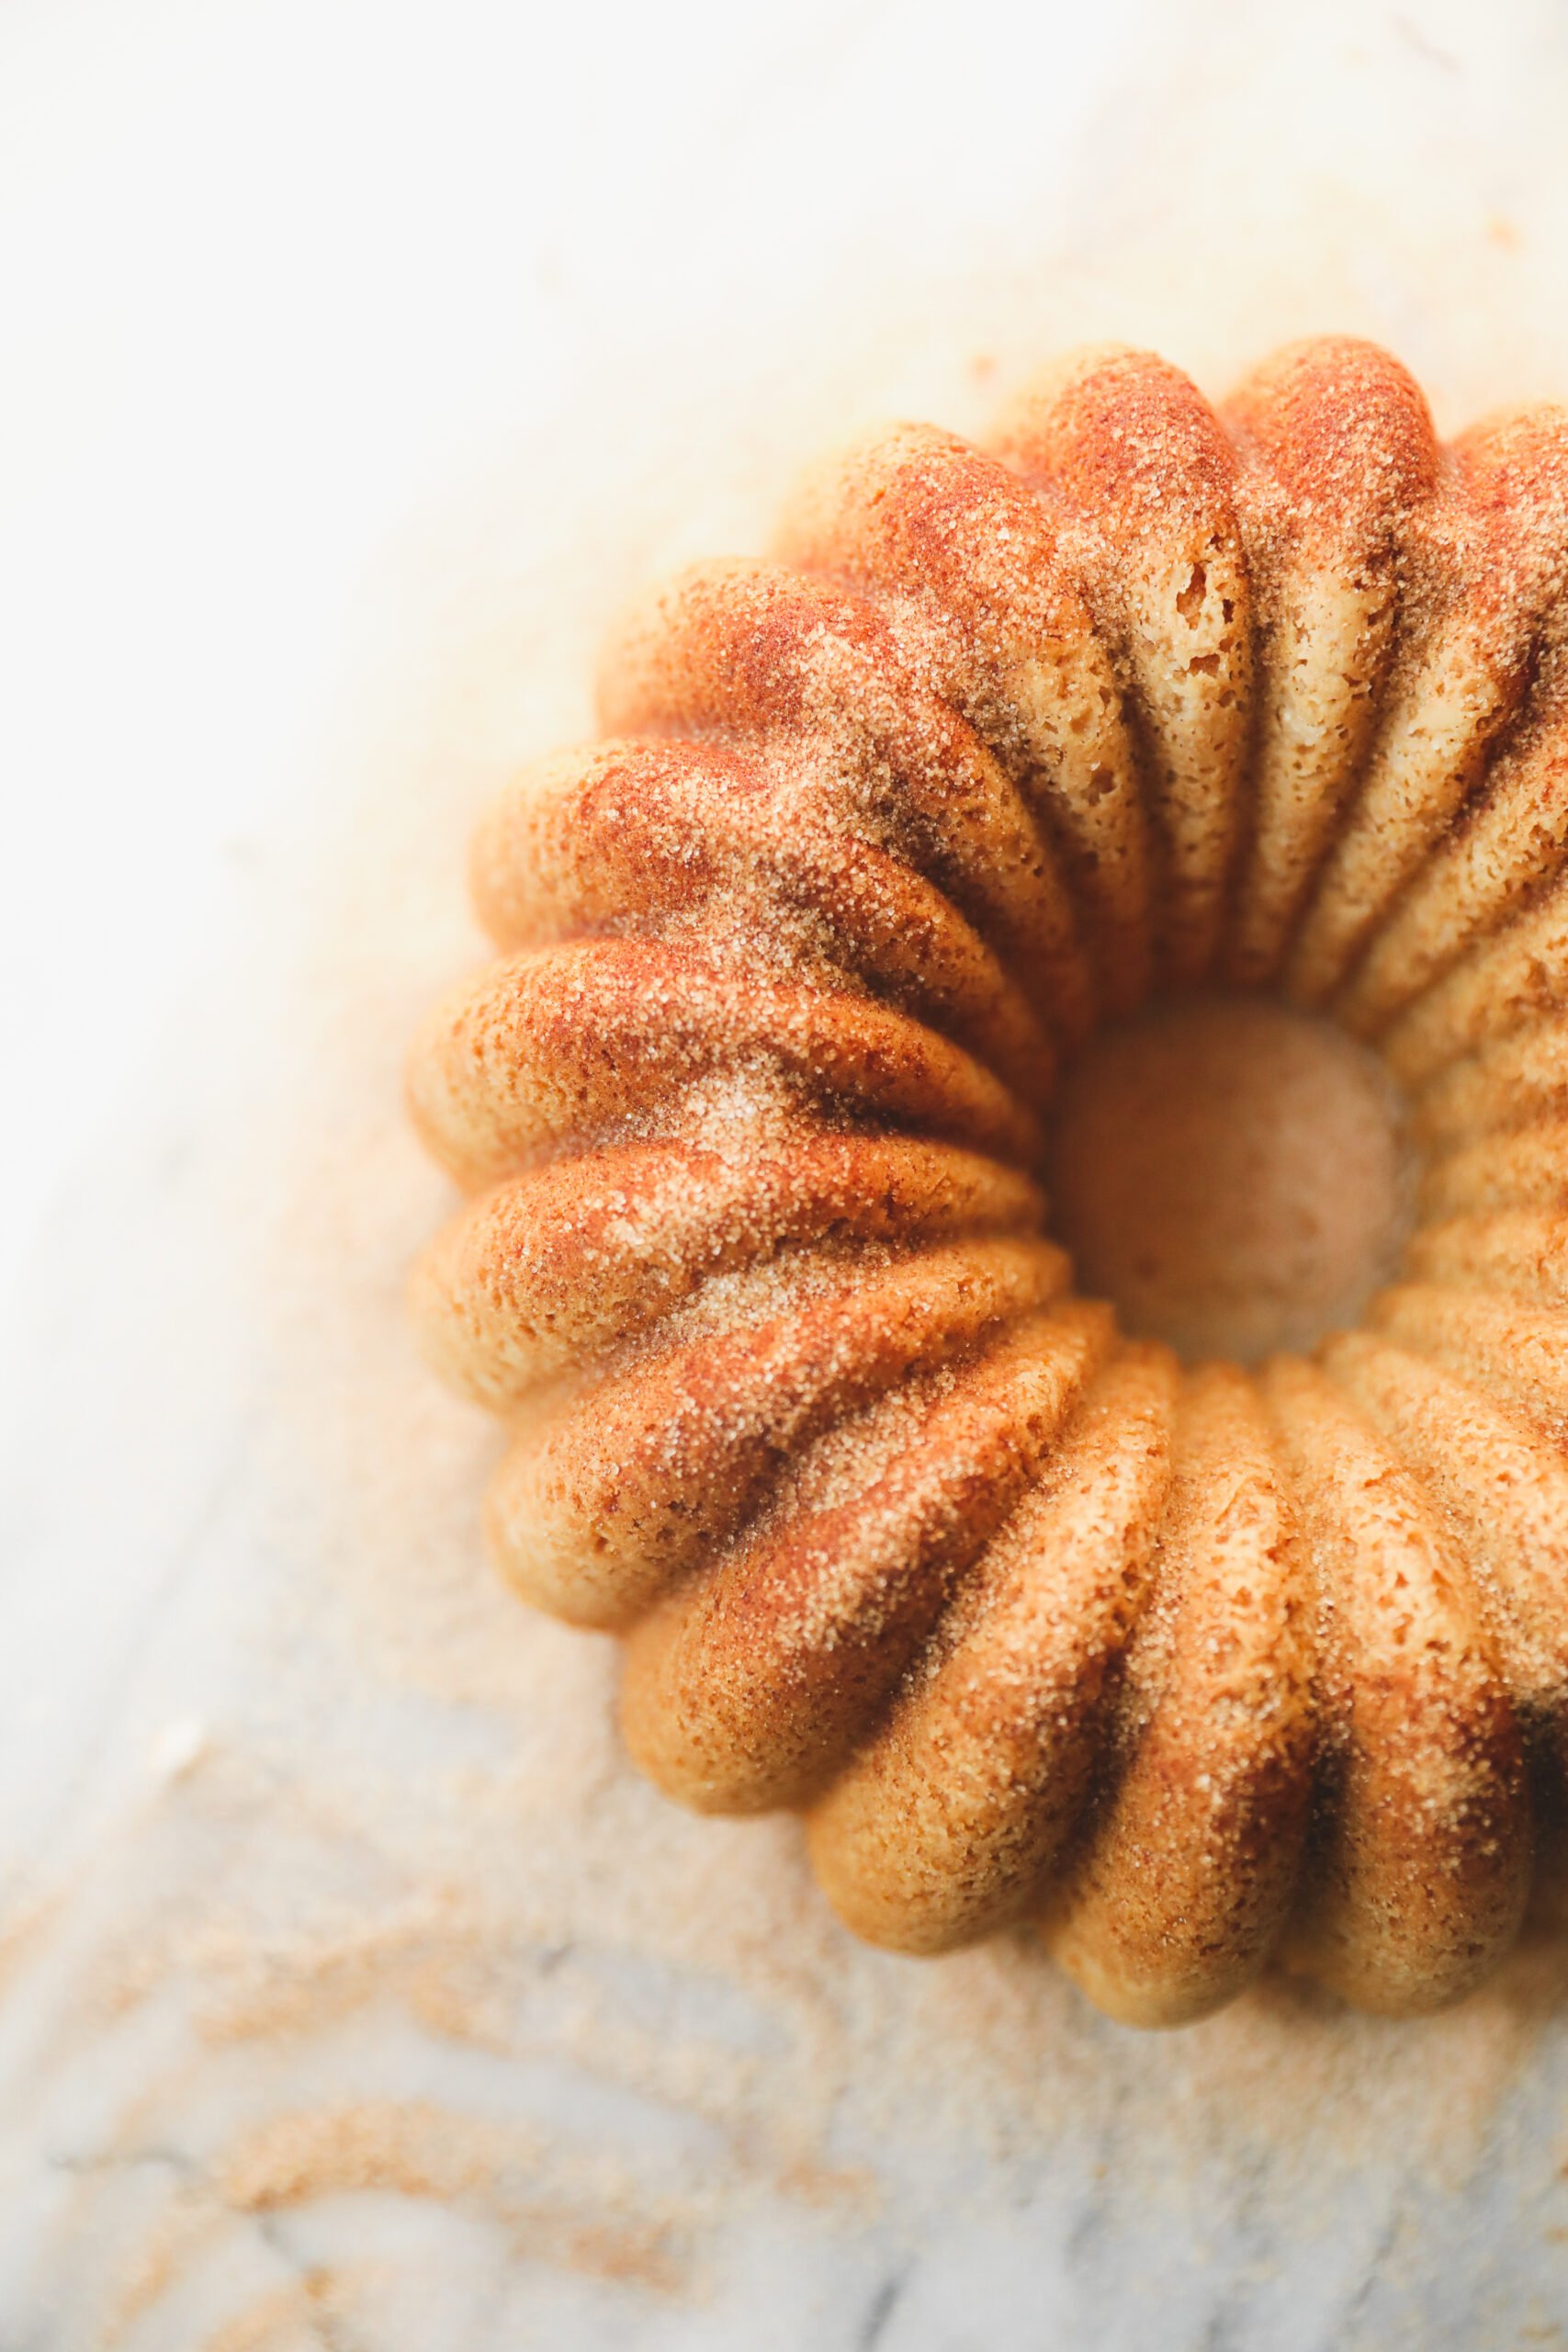 snickerdoodle Bundt Cake dusted with cinnamon sugar